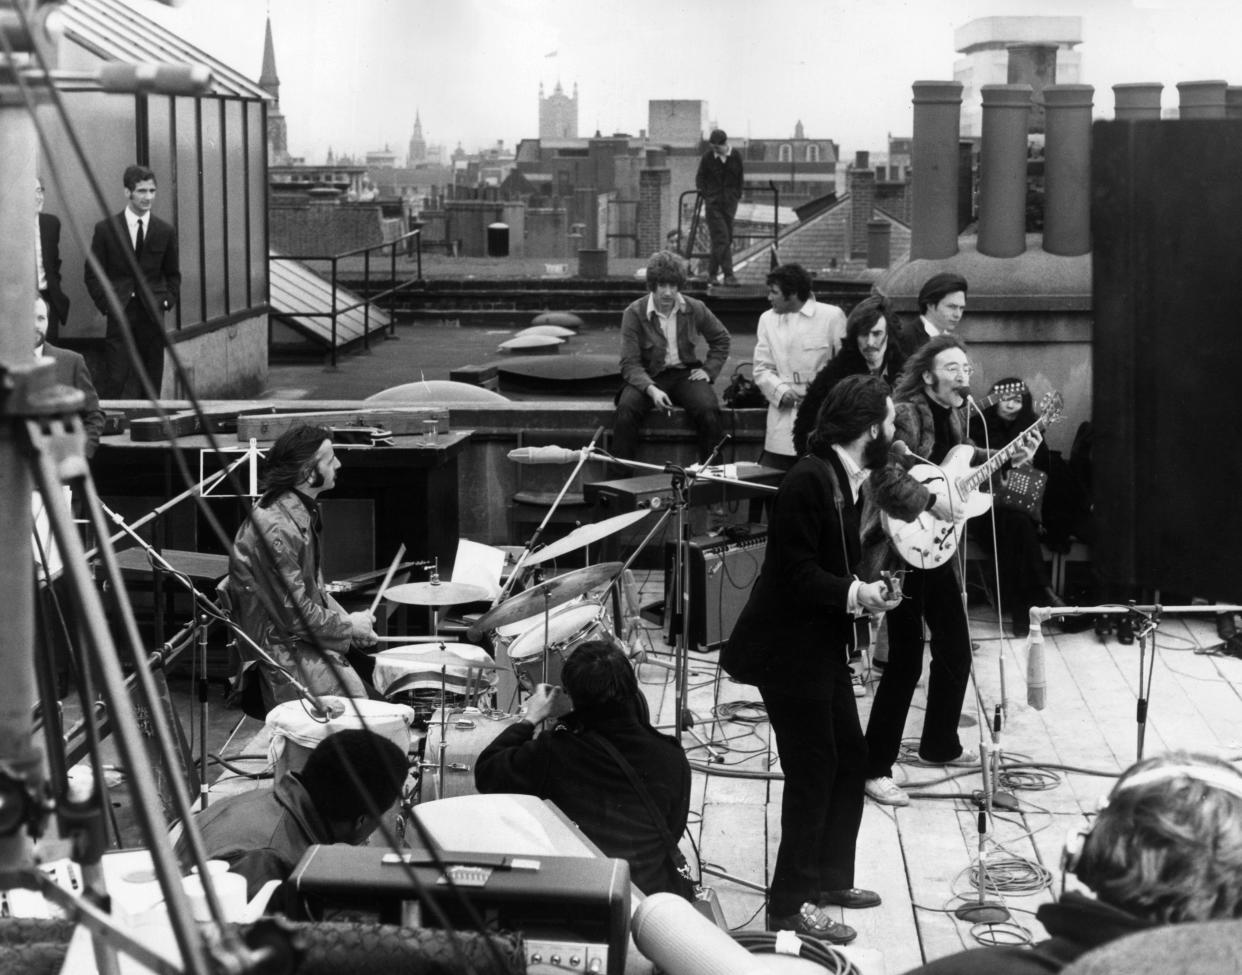 The Beatles performing their last live public concert on the rooftop of the Apple Corps building on Savile Row, London, England. / Credit: Express/Express/Getty Images